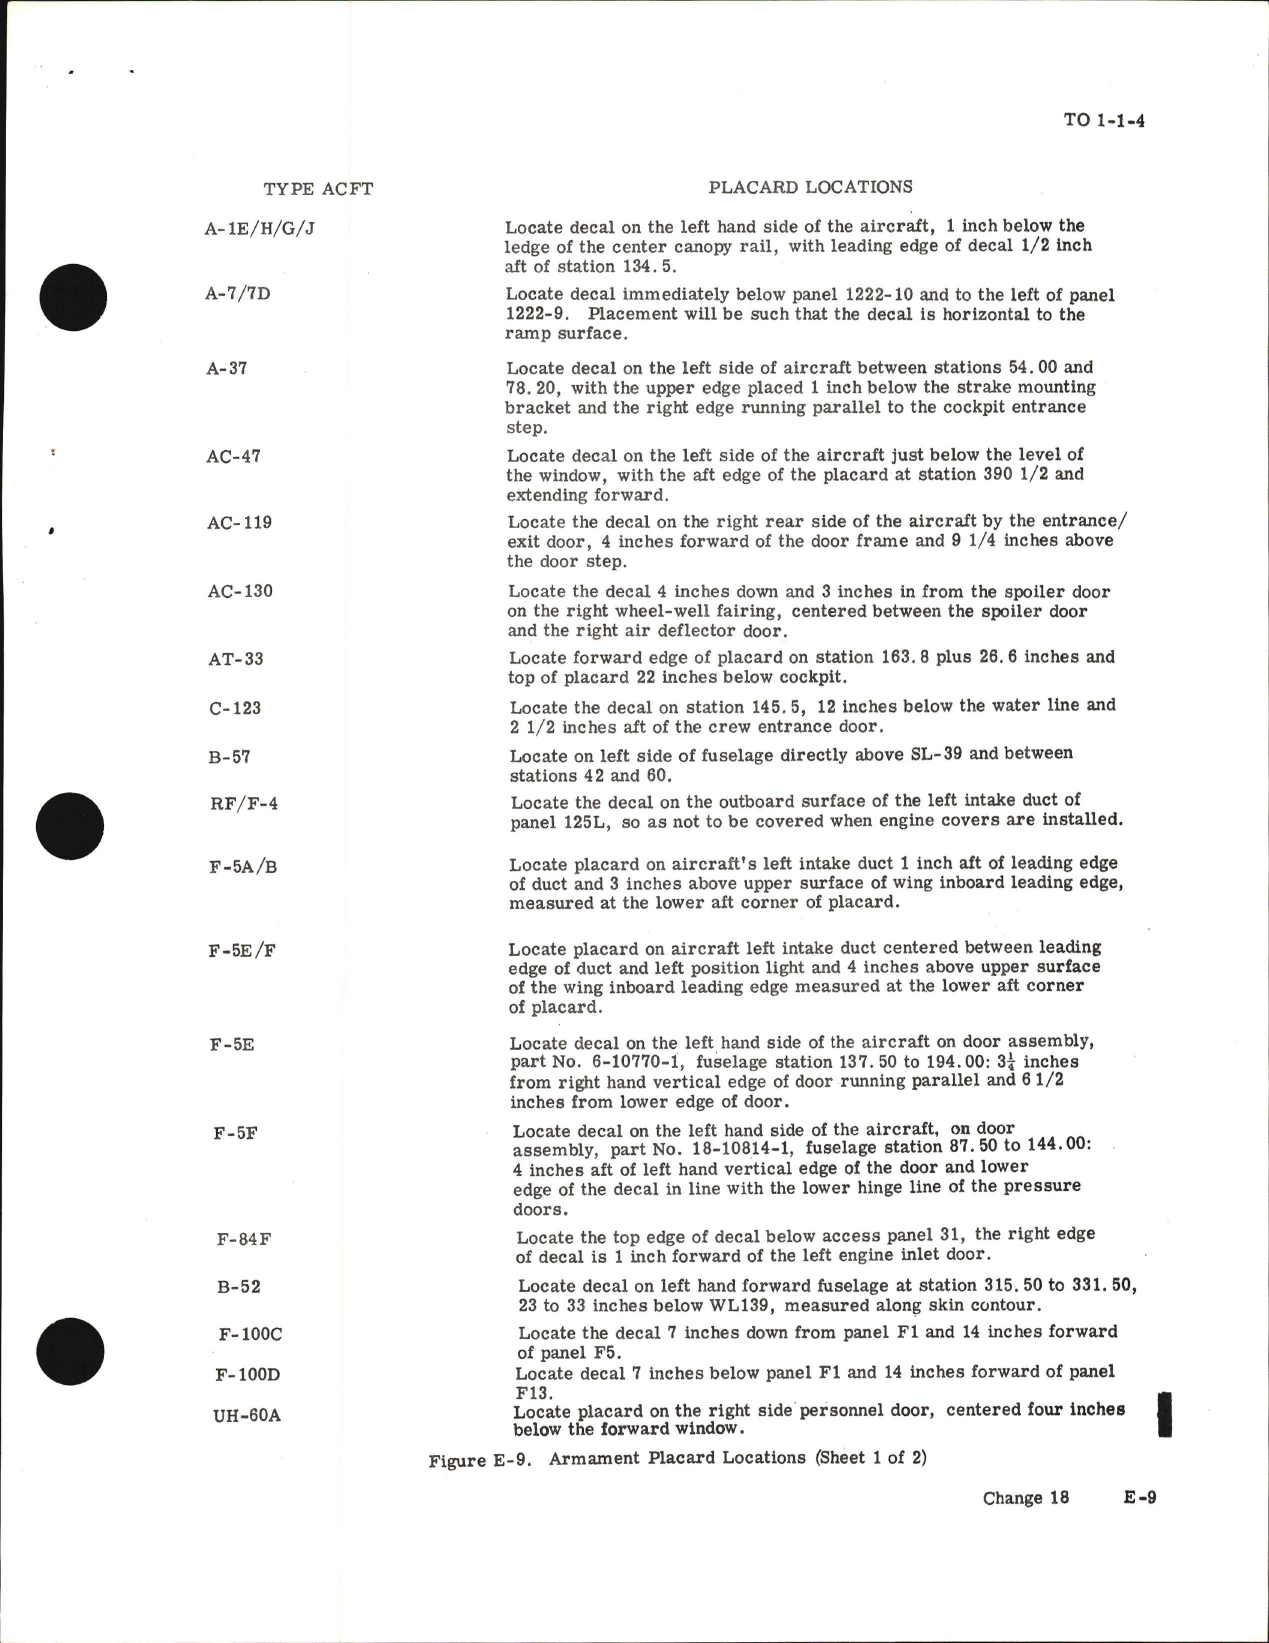 Sample page 5 from AirCorps Library document: Exterior Finishes, Insignia and Markings for USAF Aircraft - Change - 21